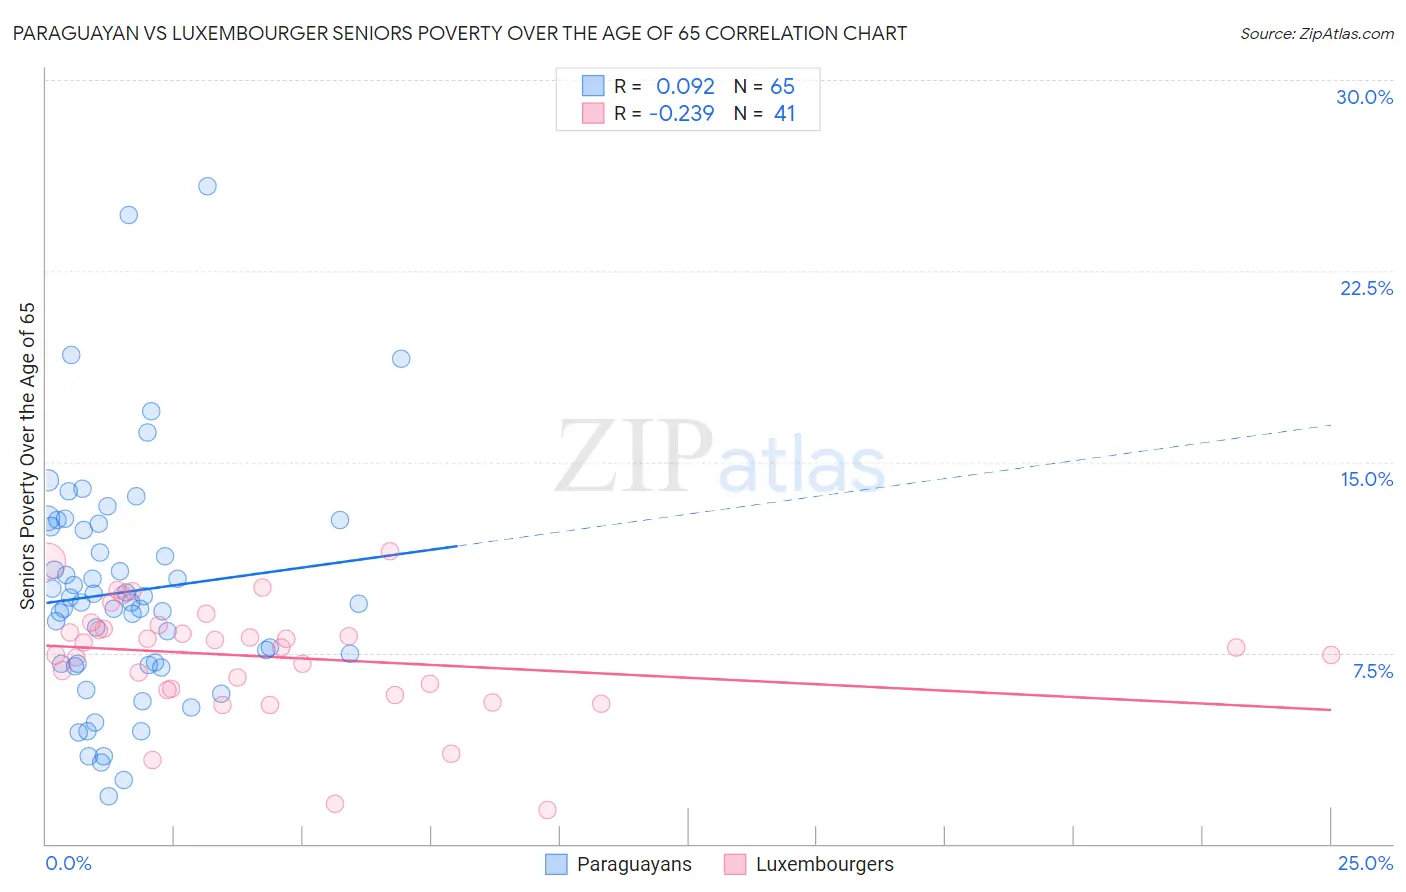 Paraguayan vs Luxembourger Seniors Poverty Over the Age of 65